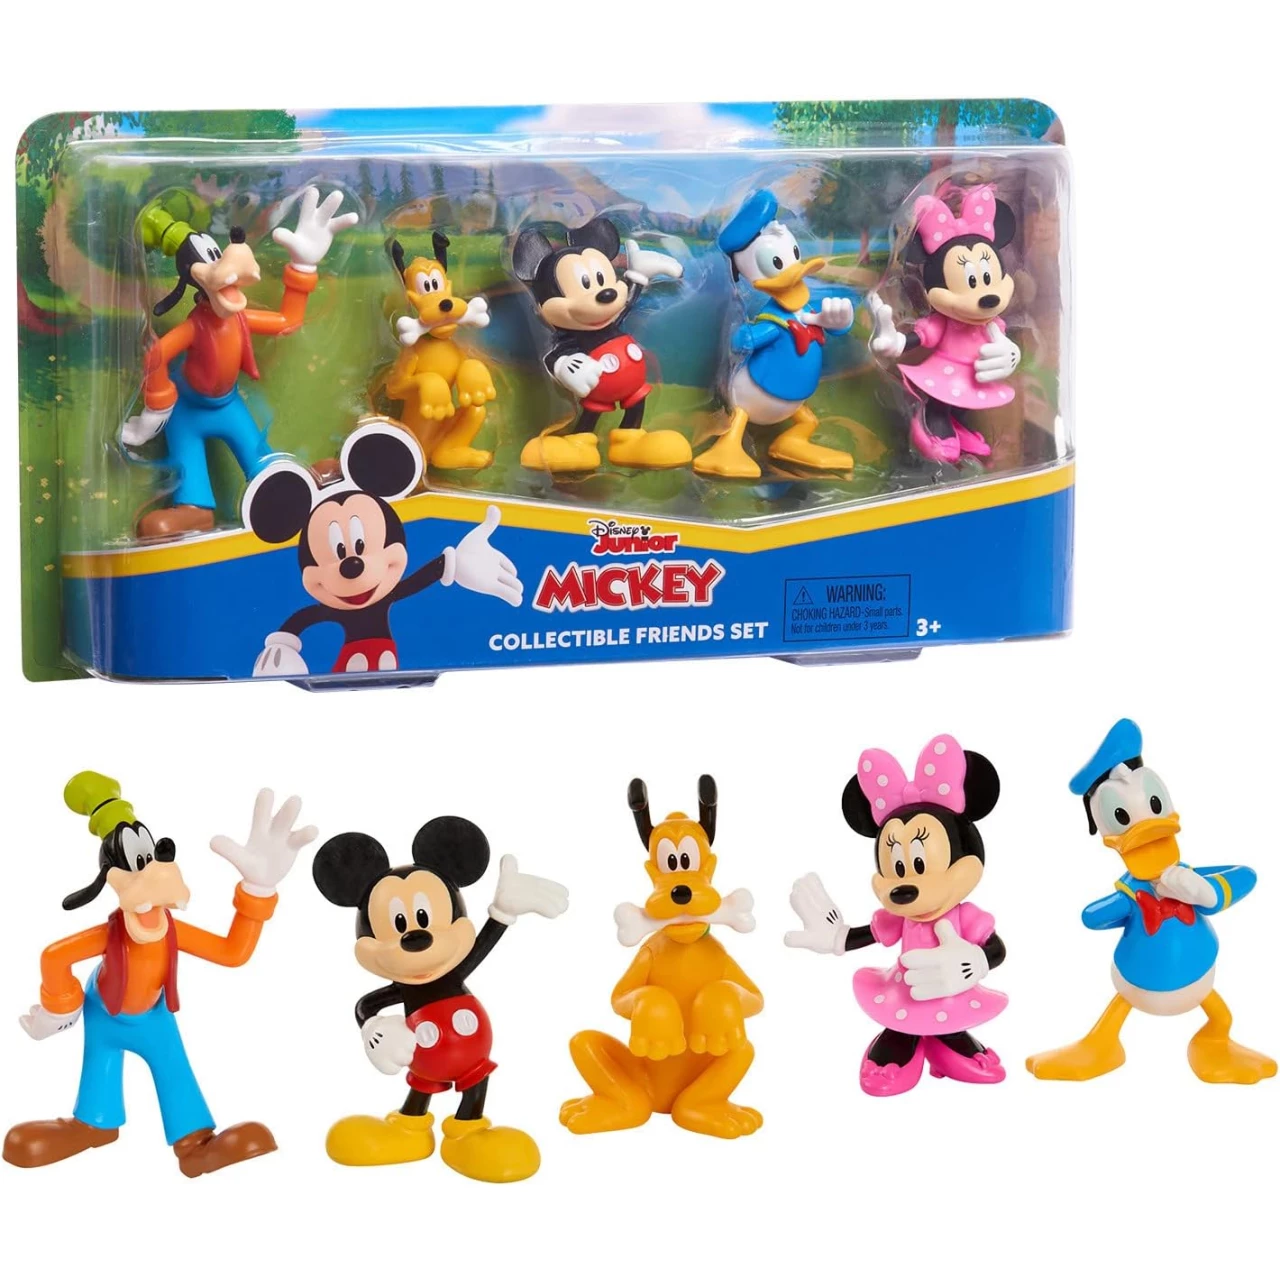 Mickey Mouse Collectible Figure Set, 5 Pack, Officially Licensed Kids Toys for Ages 3 Up, Gifts and Presents by Just Play